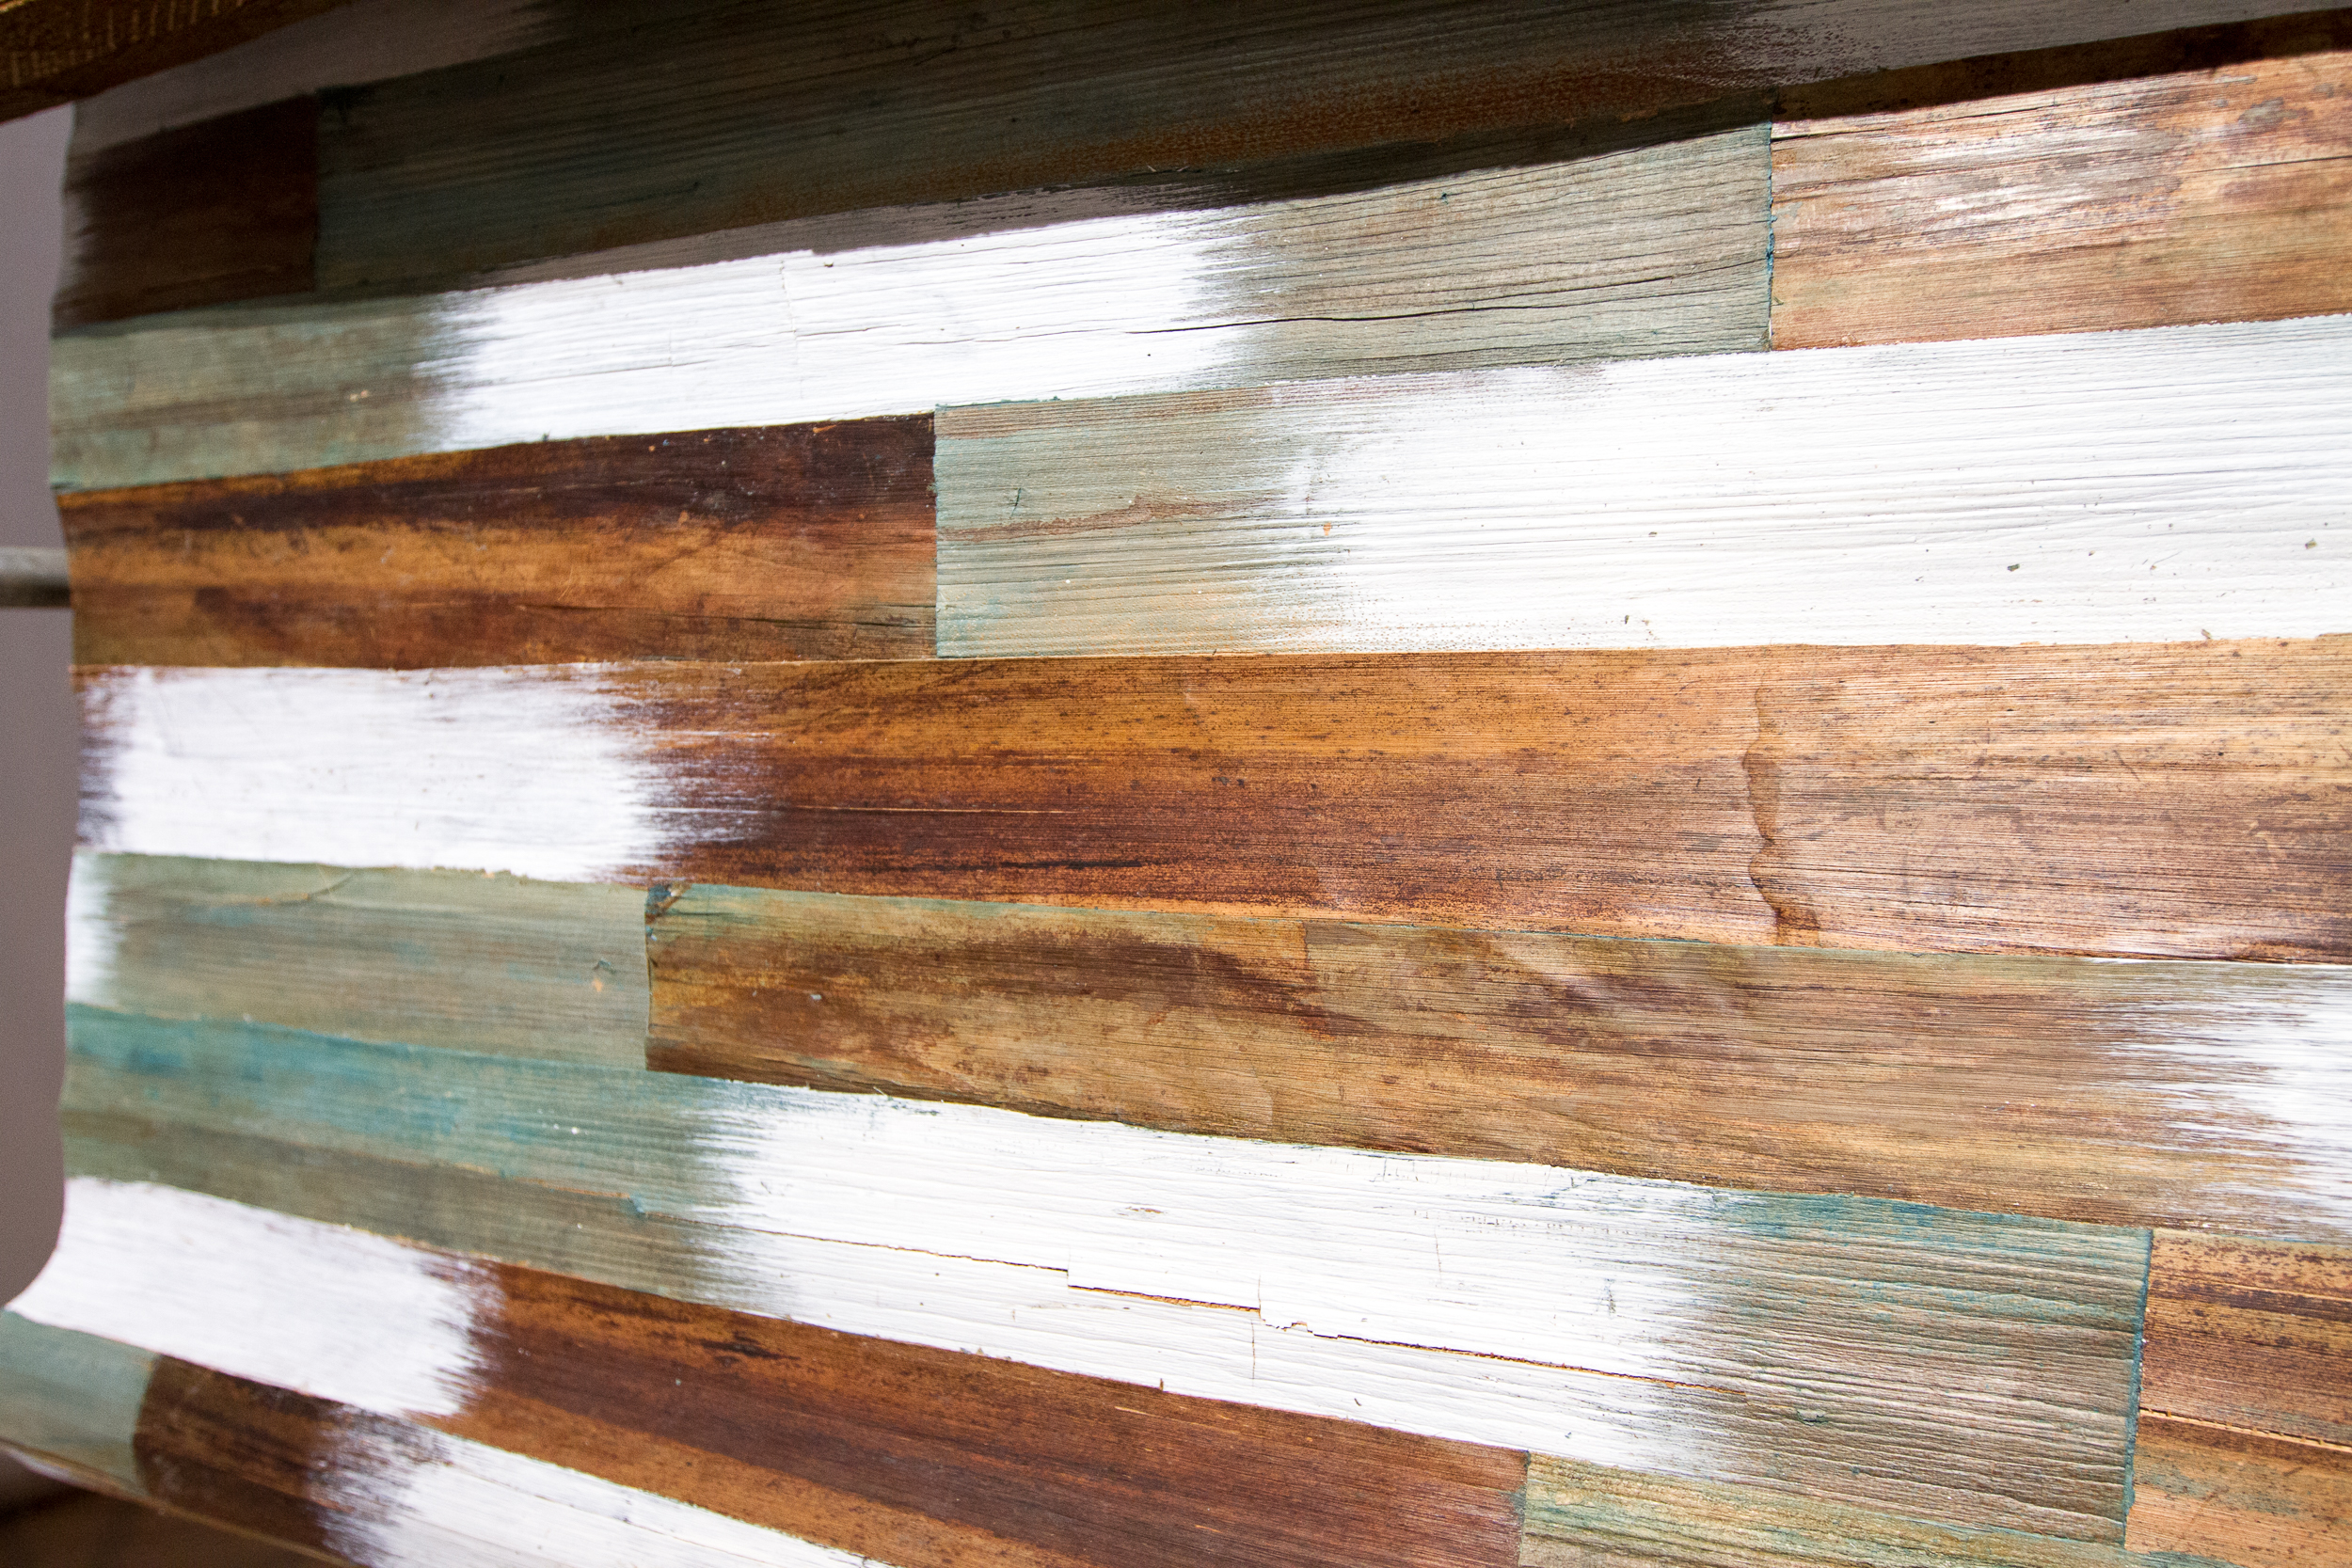  "Wallpaper" made from thin pieces of recovered wood. 